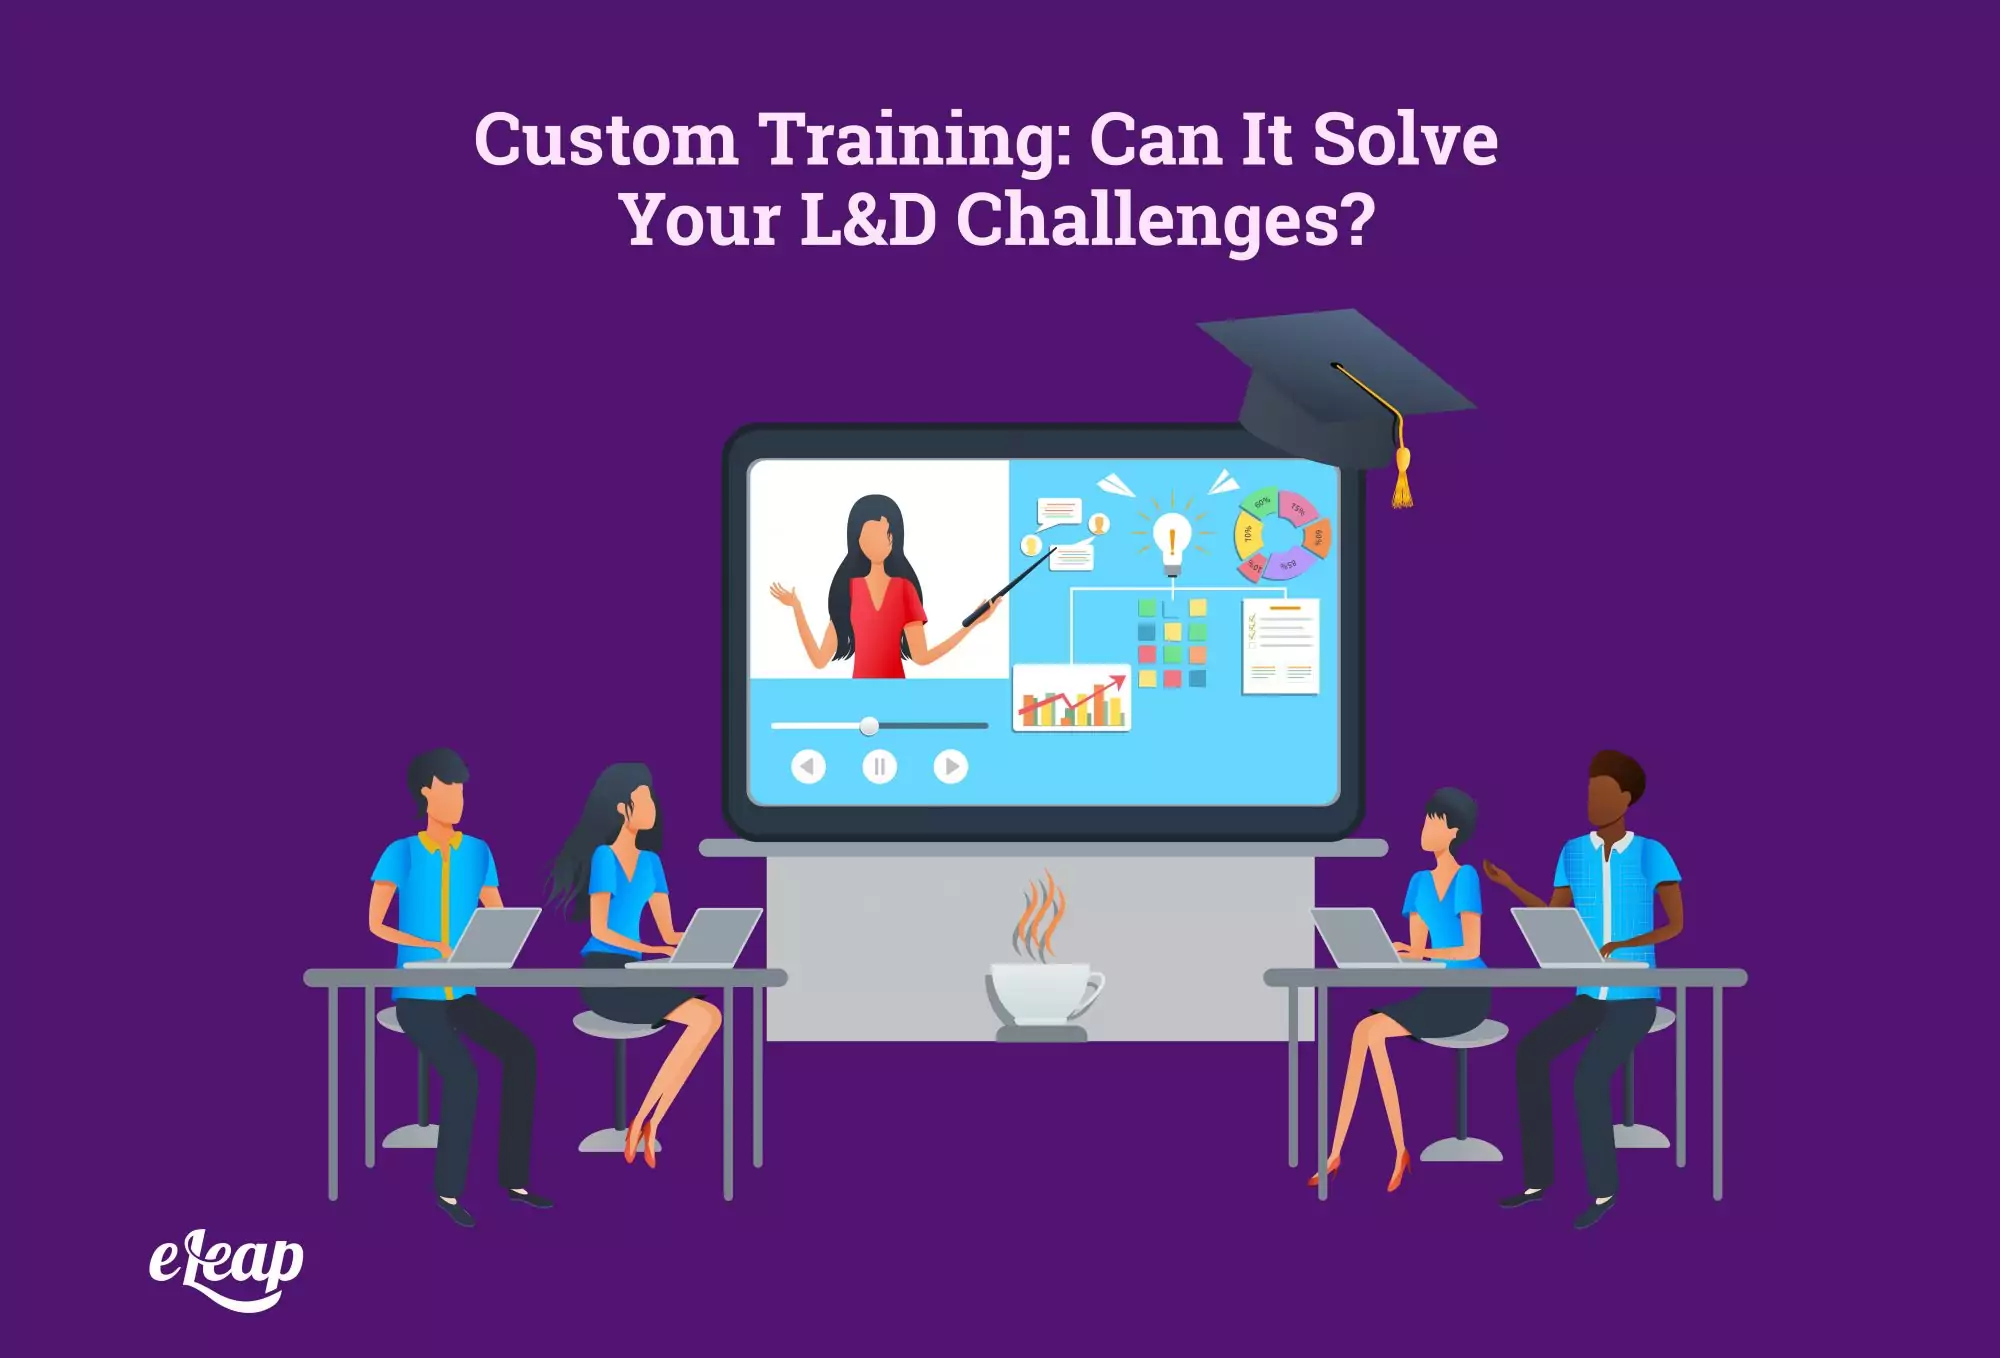 Custom Training: Can It Solve Your L&D Challenges?